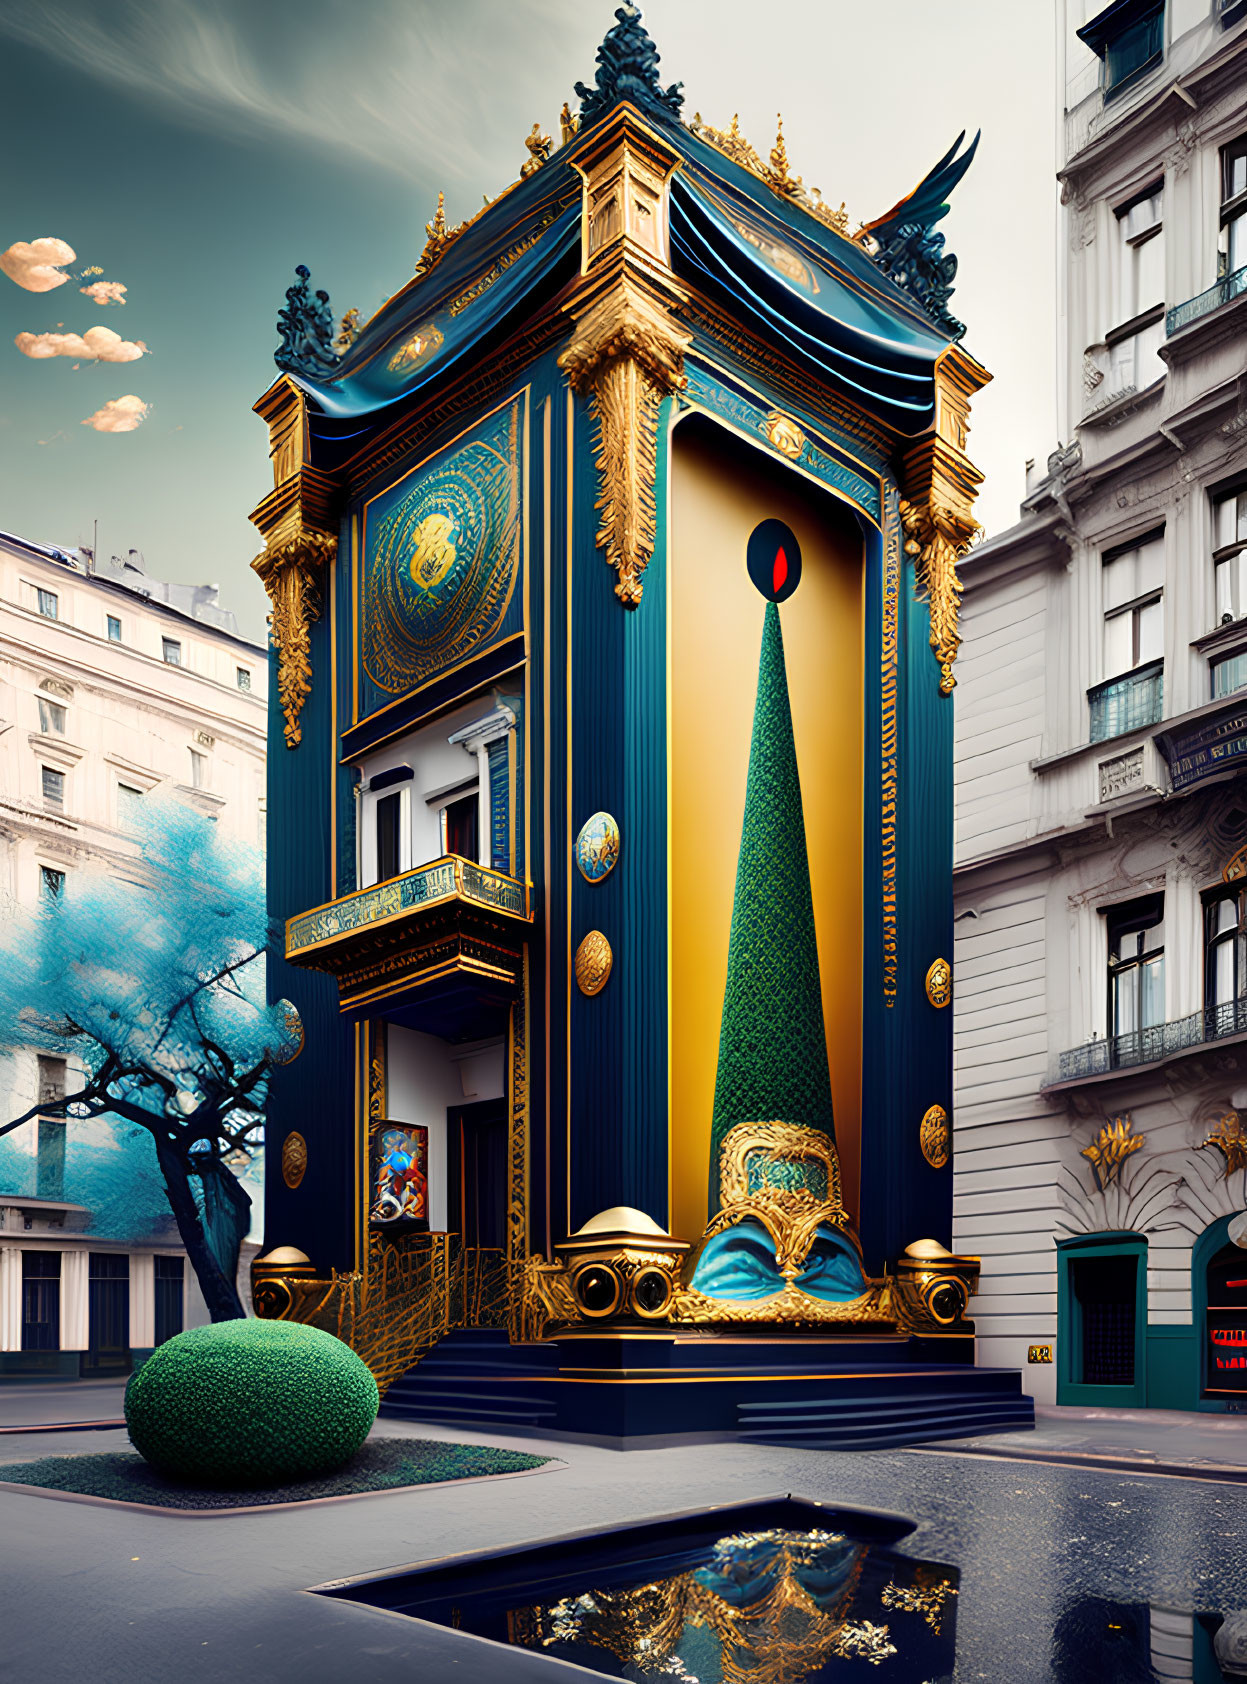 Ornate surreal building facade with blue and gold color scheme and whimsical tree